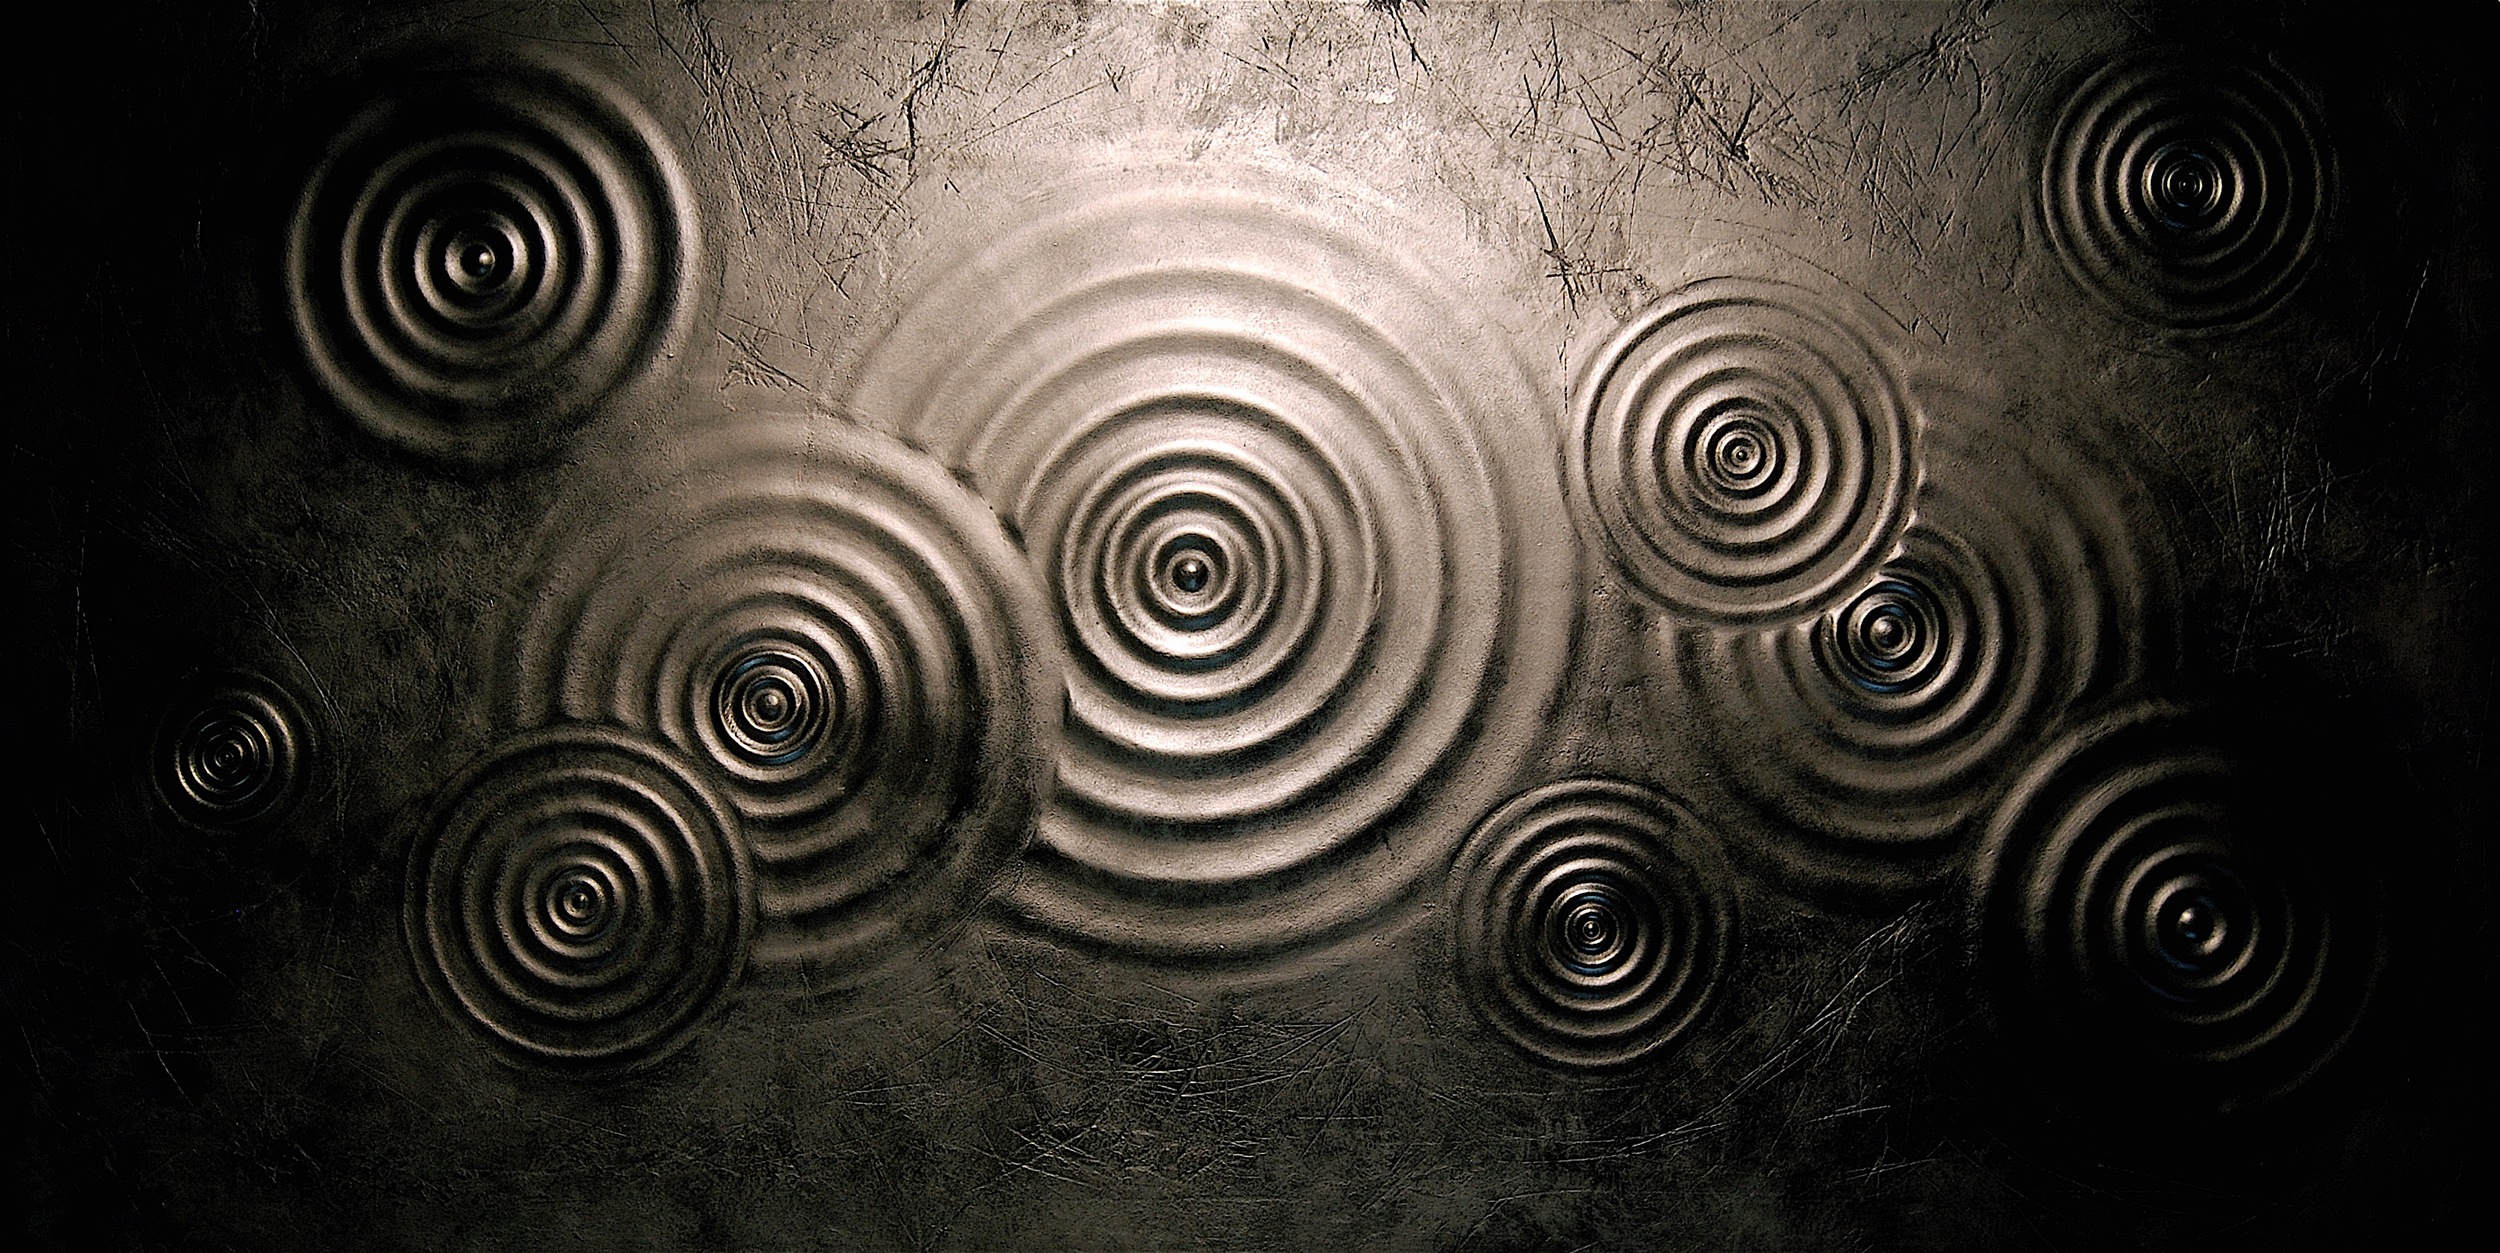 Thomas Coffin - Ripple Effect #5 (graphite), 36"h x 72"w x 2"d, mixed media sculptural wall relief